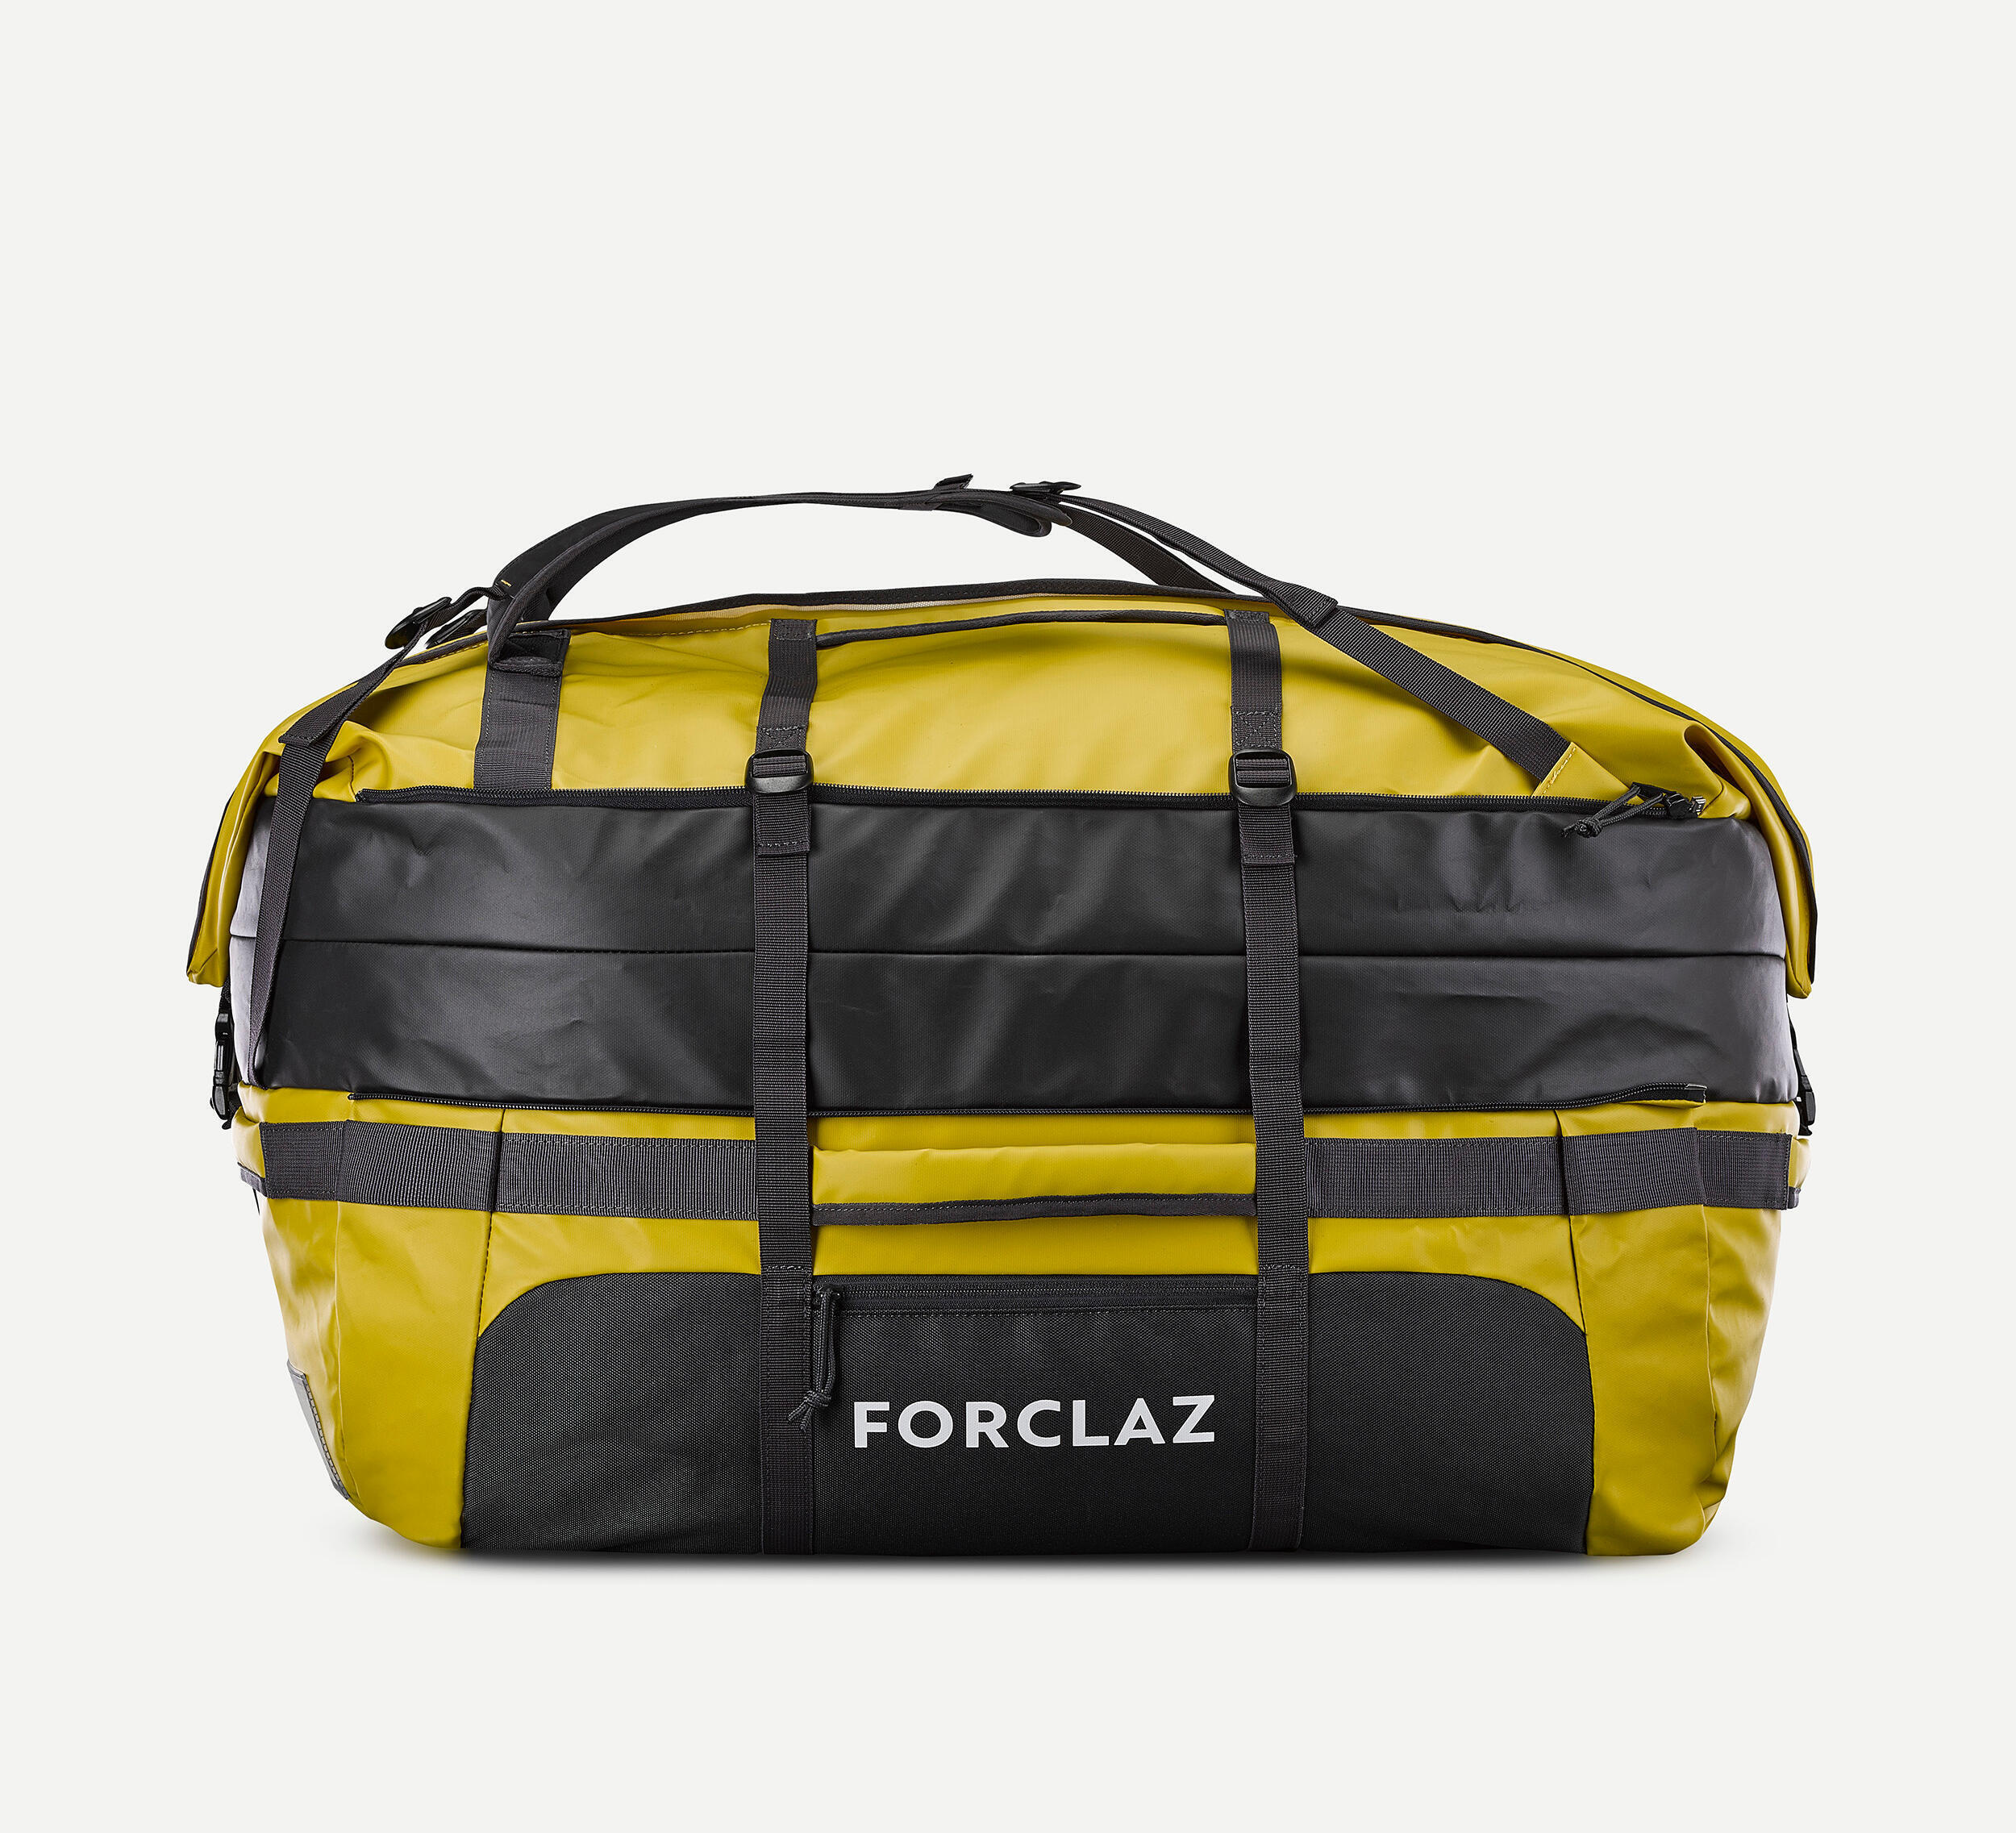 Extension of the Forclaz travel bag